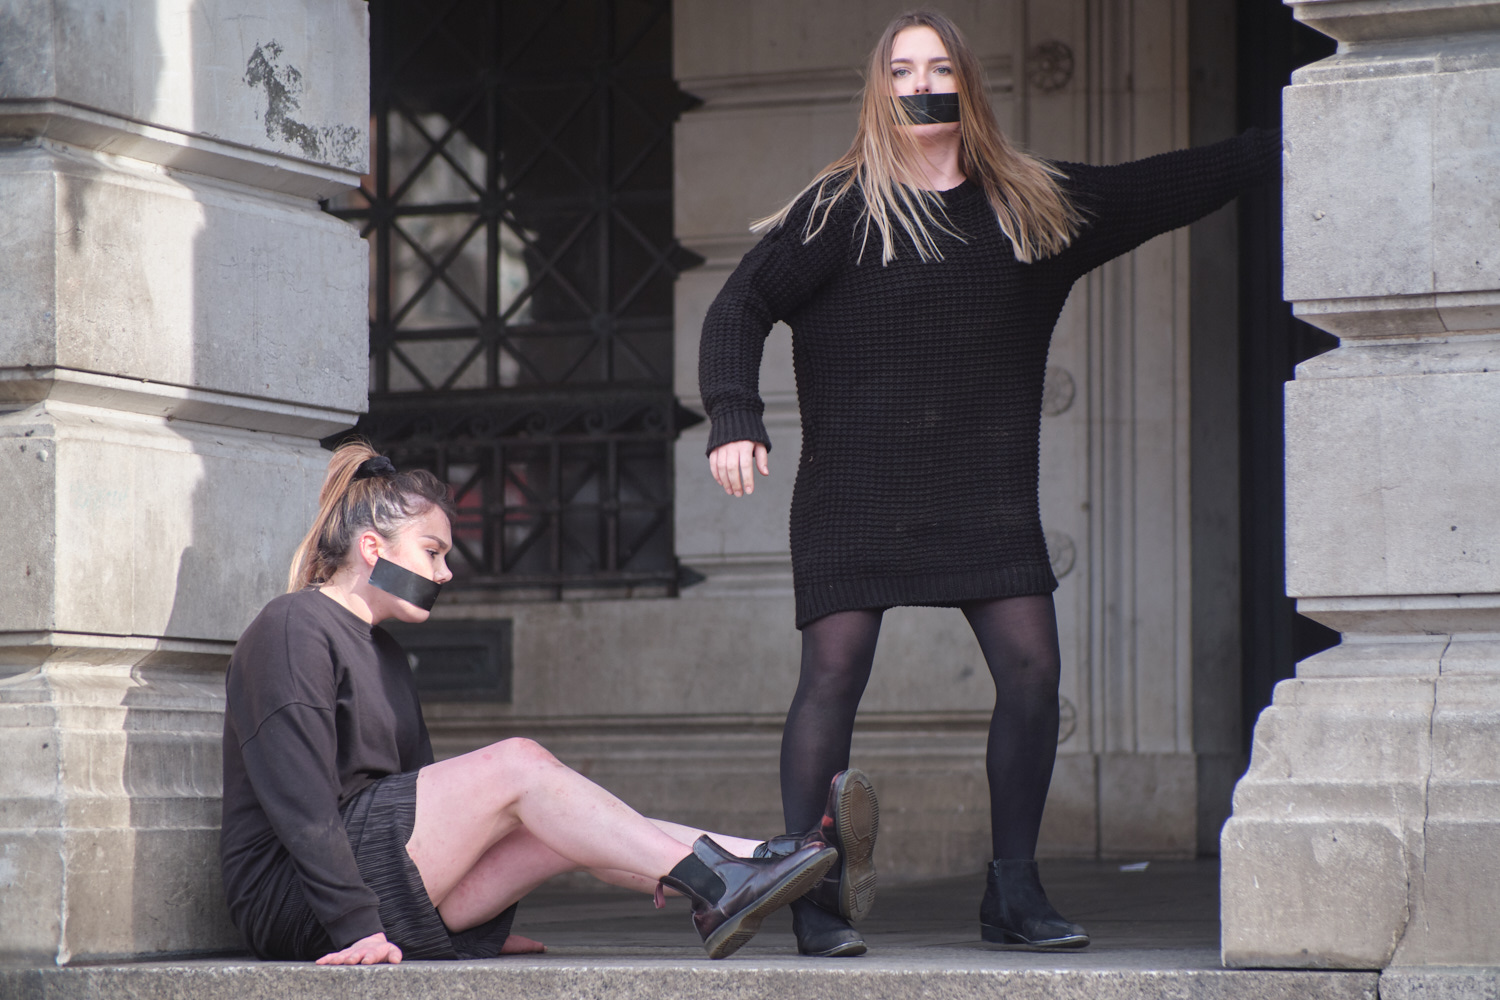 Two female performers are in a public space with black tape covering their mouths, wearing black outfits.